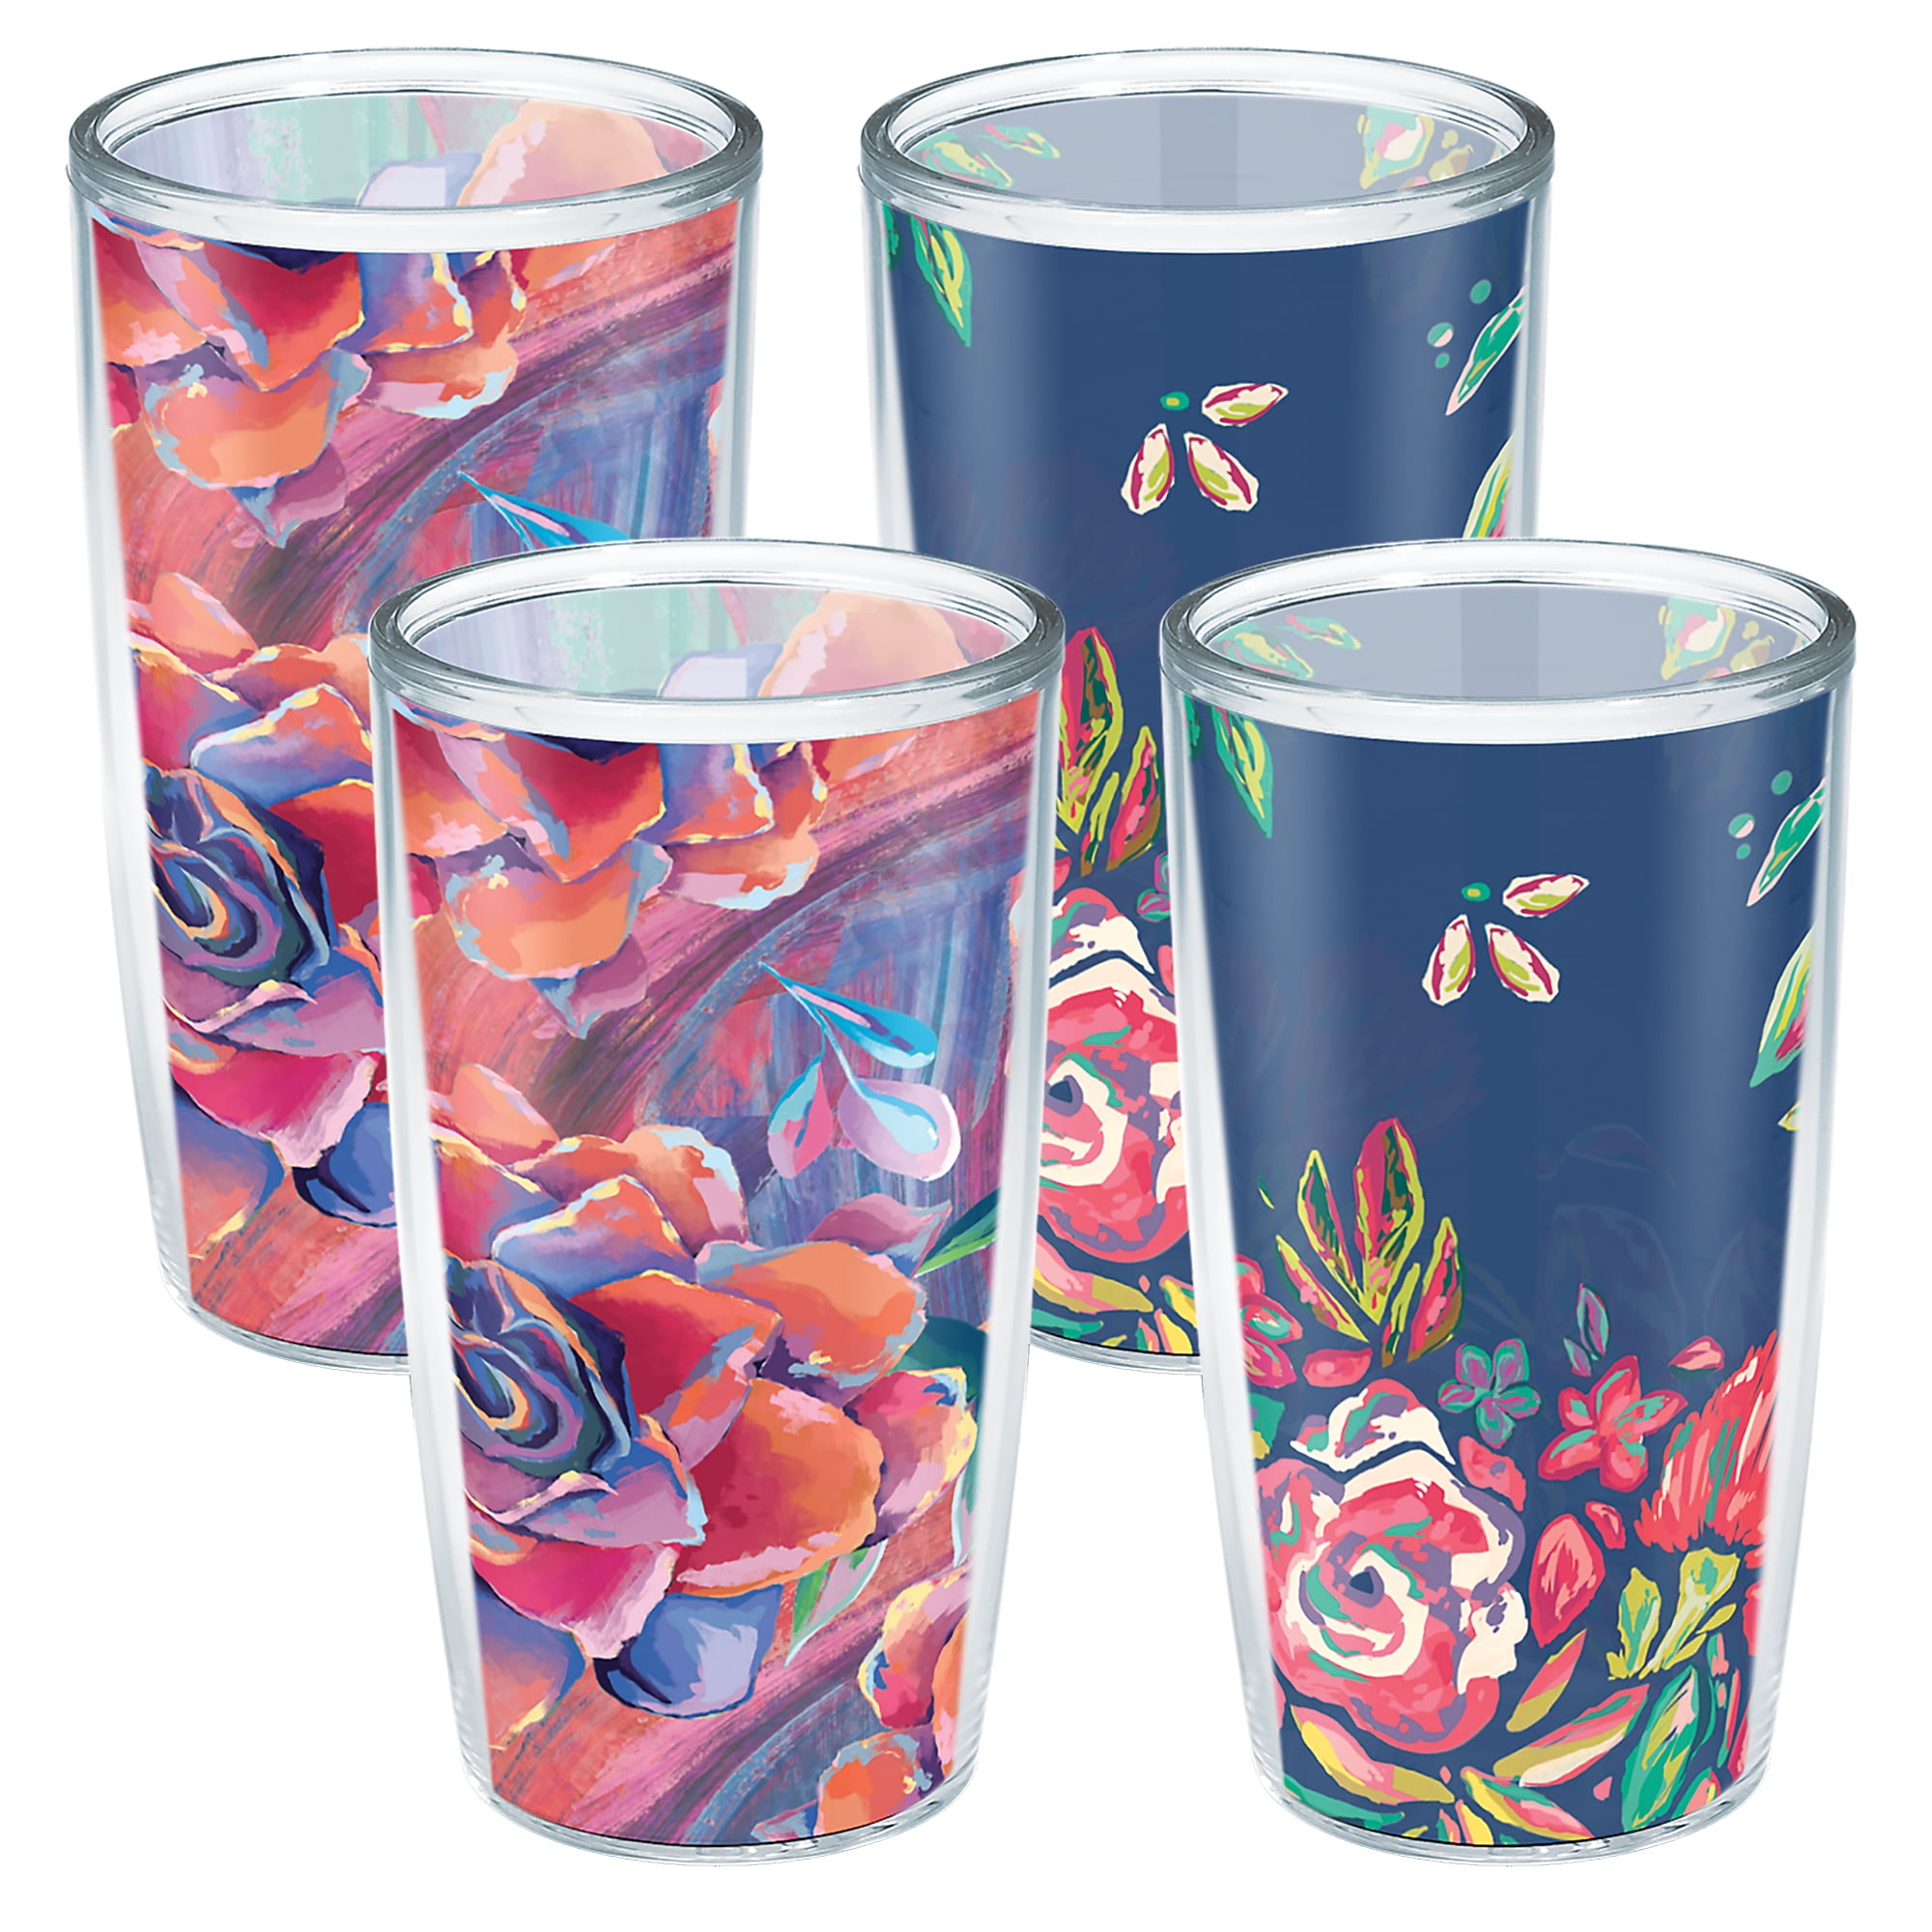 Insulated Tervis Drinkware - Liberty Tabletop - Made in the USA